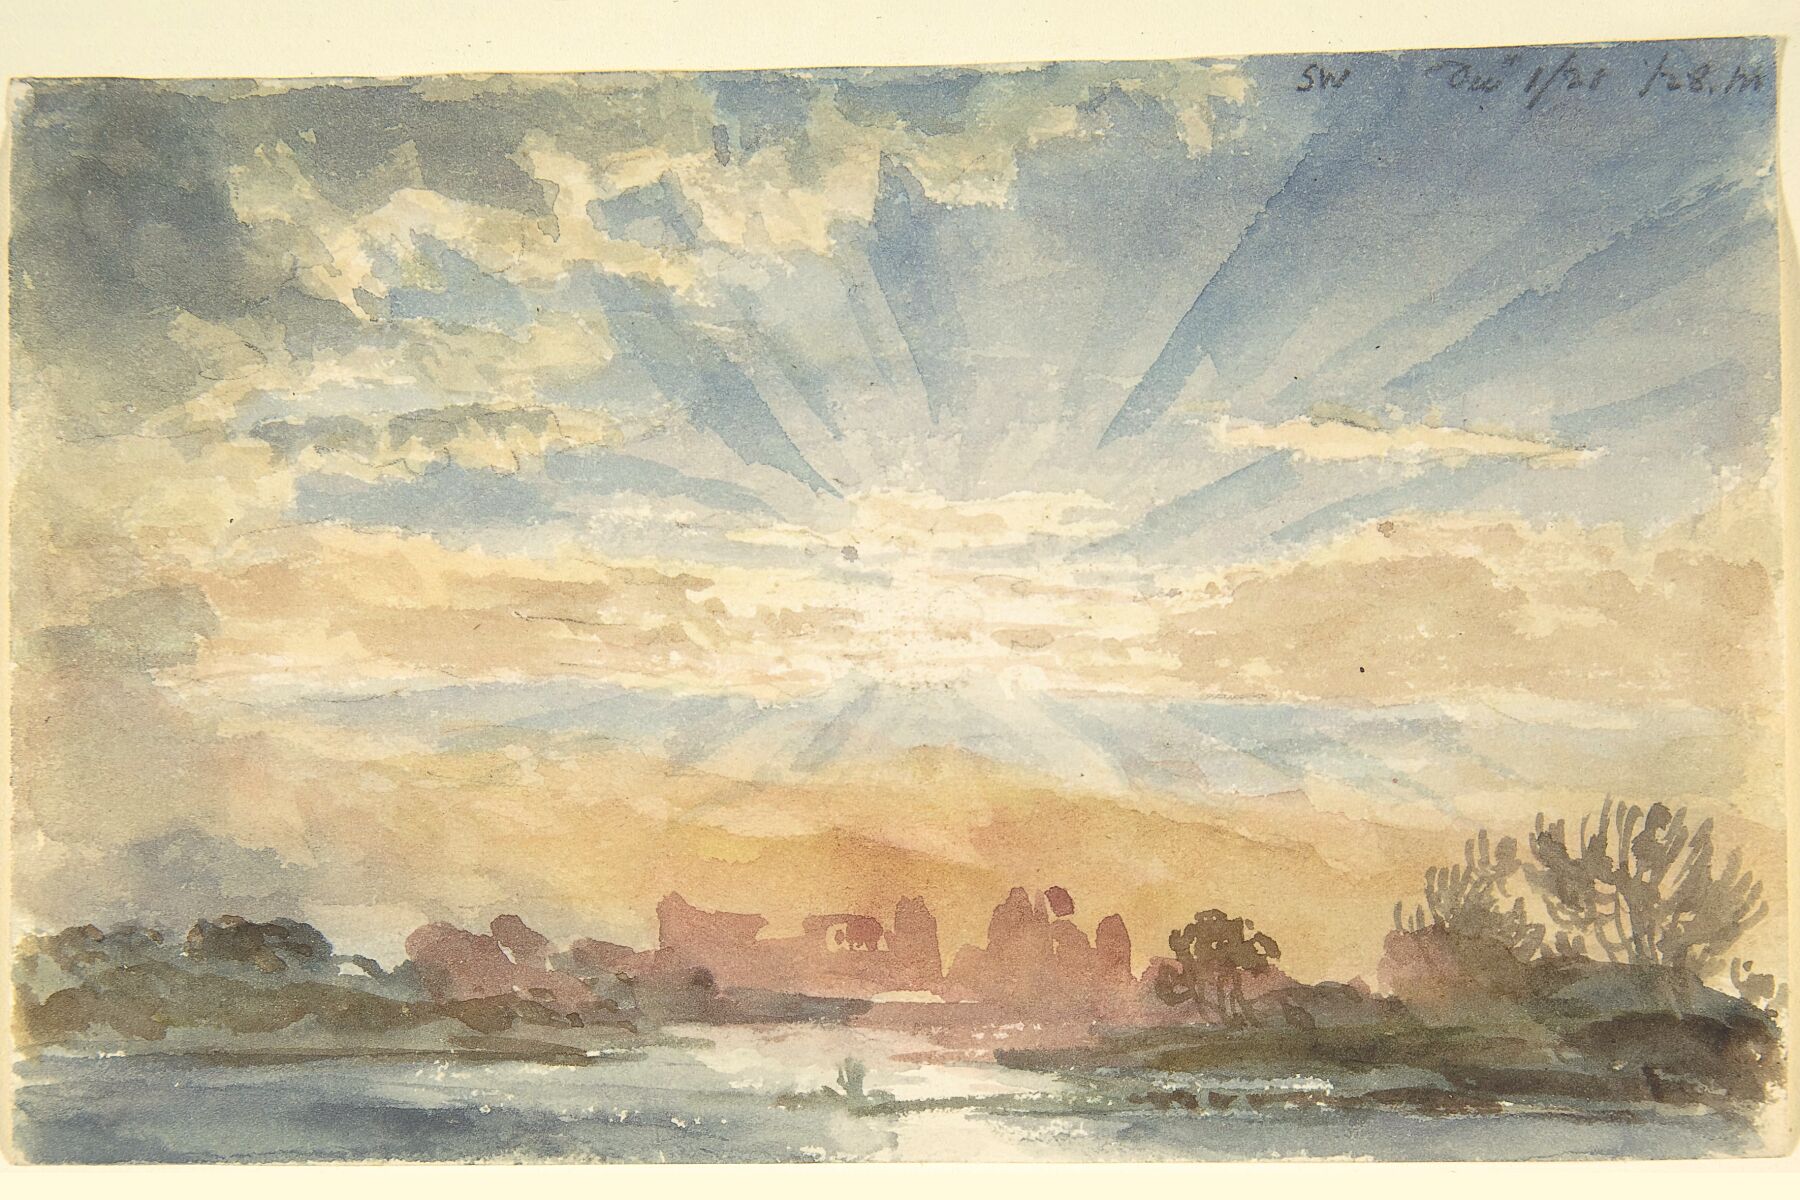 Landscape with Rising Sun, December 1, 1828 at 8-30 a.m by Joseph Michael Gandy